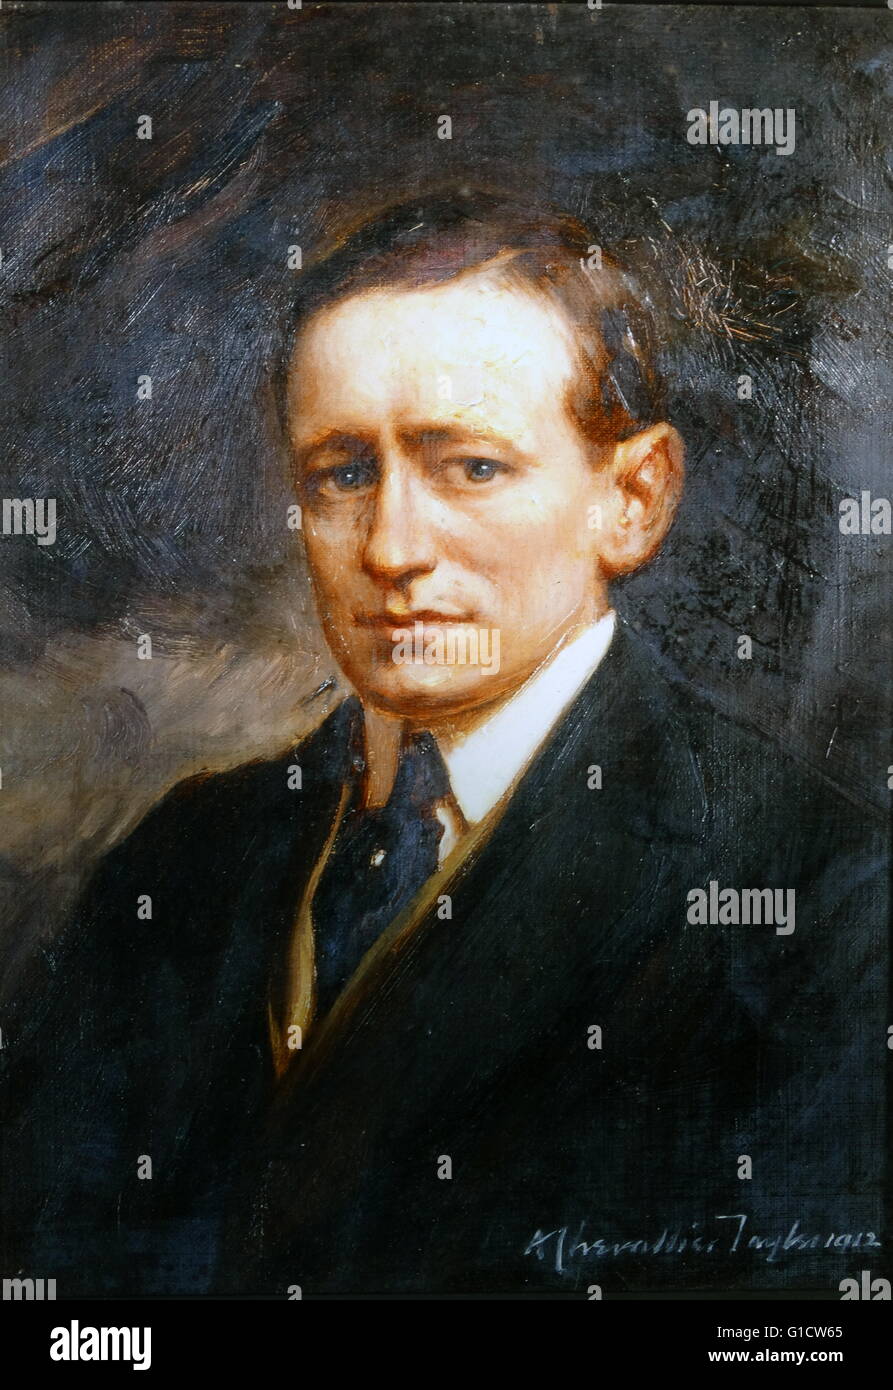 Coloured portrait of Guglielmo Marconi, 1st Marquis of Marconi (1874-1937) an Italian inventor and electrical engineer, best known for his pioneering work on long-distance radio transmission and Marconi's law. Dated 20th Century Stock Photo